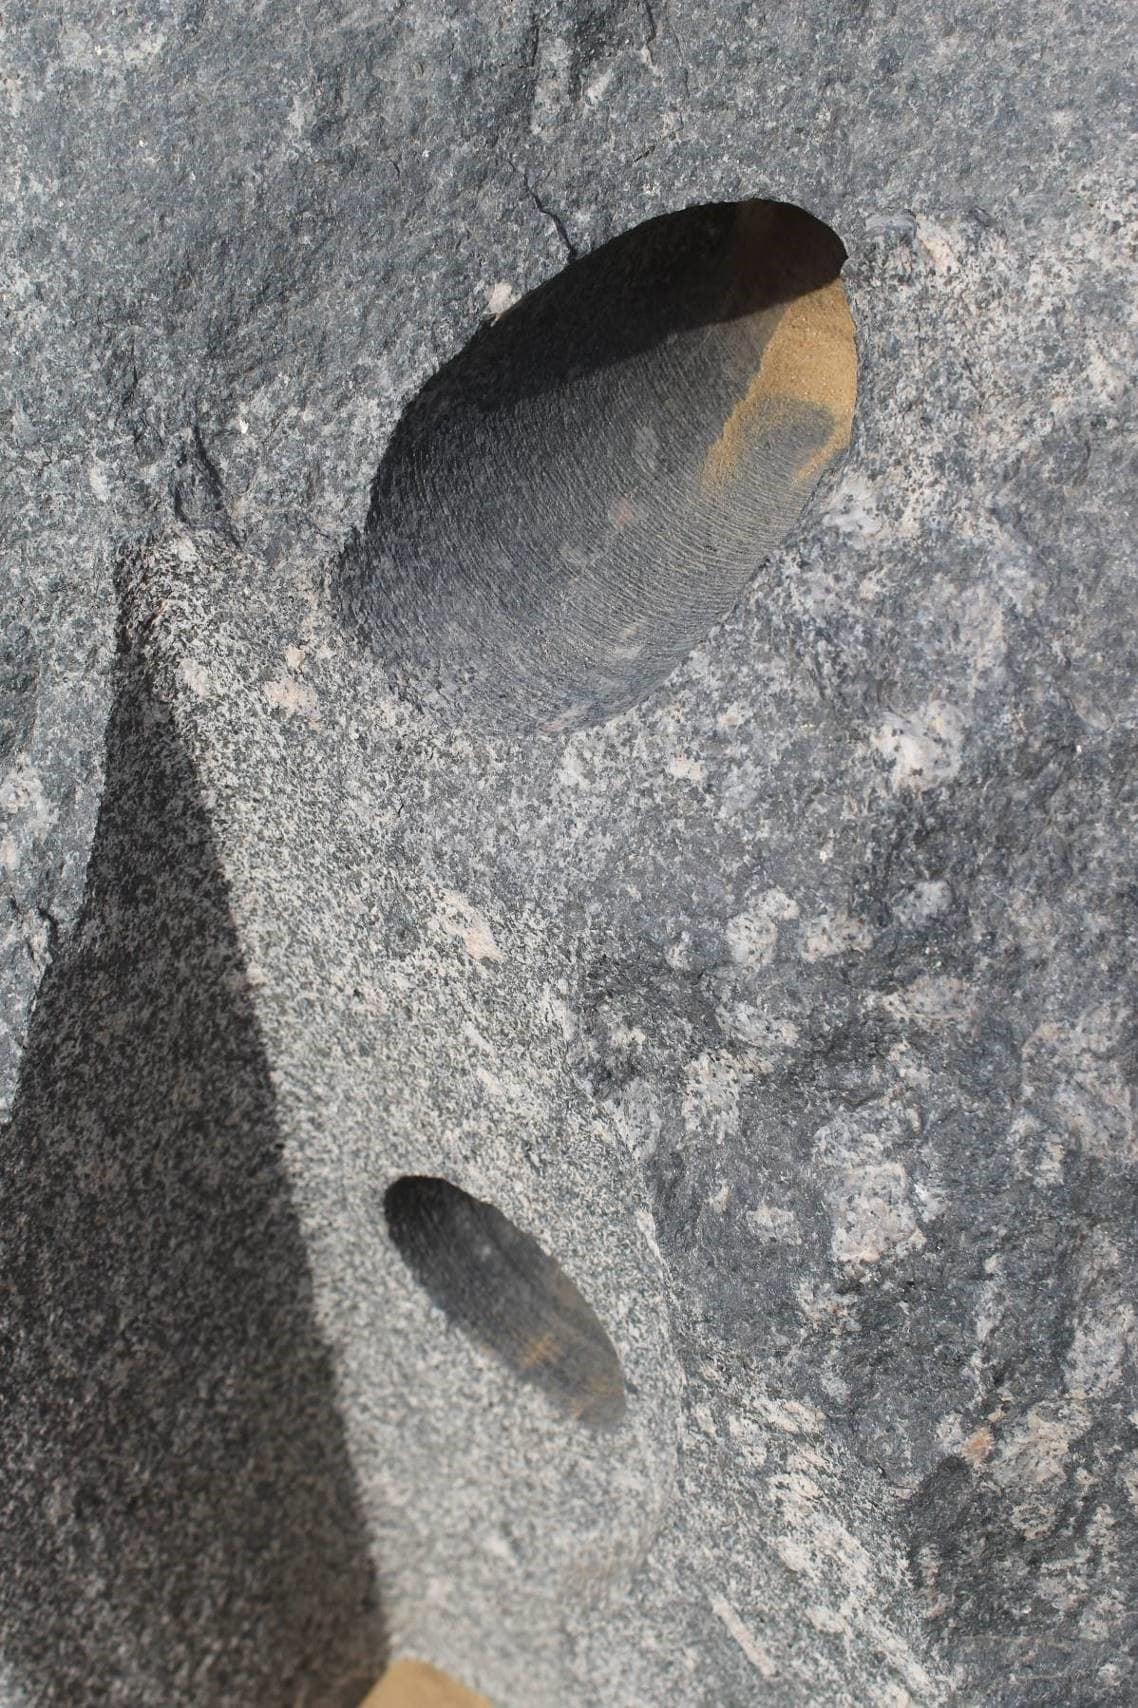 The above photo shows you the marks left by the cutter as it penetrated this black granite located at Abusir. Image Credit